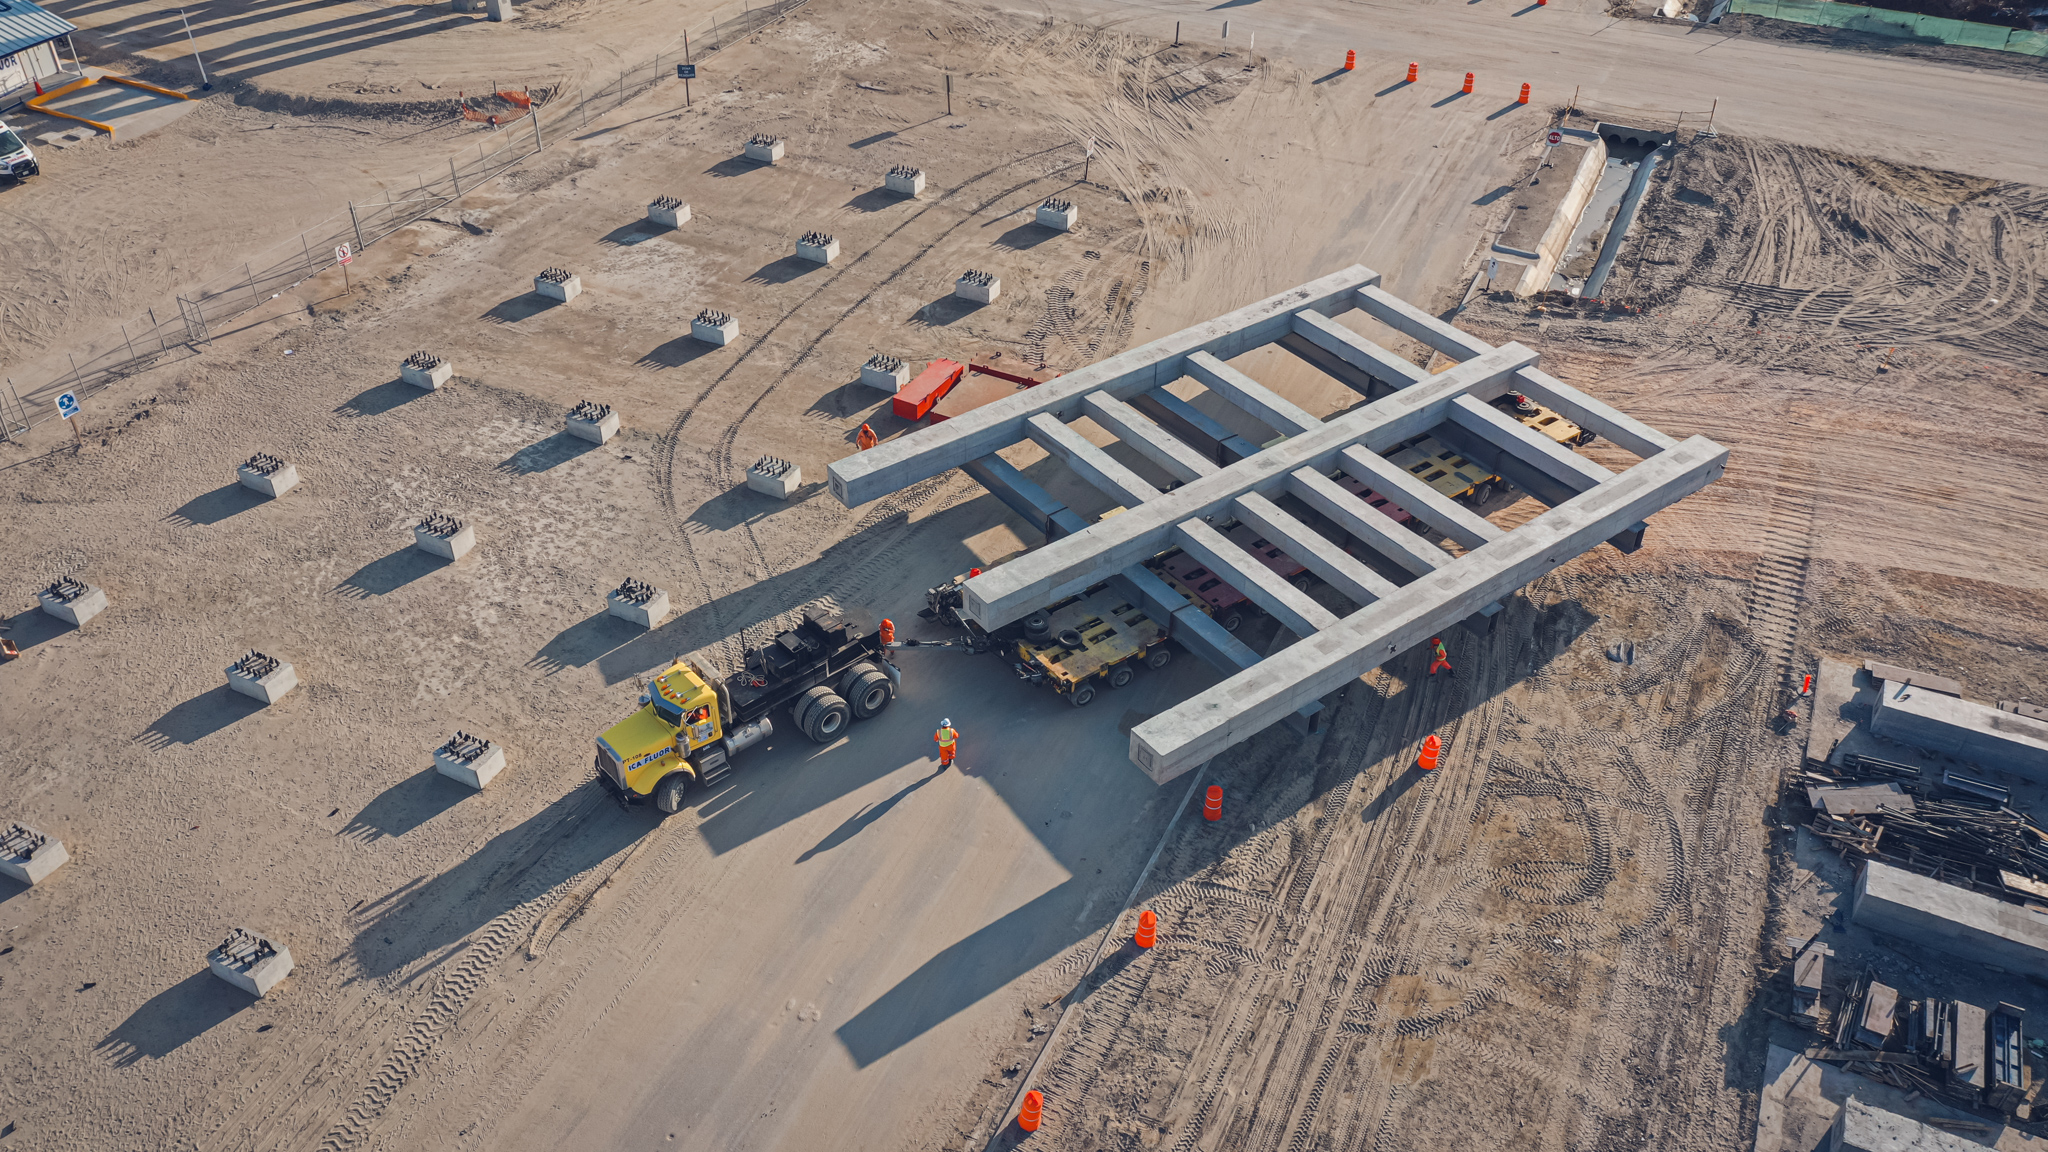 The heavy-duty THP/SL modules used by PESADO Transport were ideal for on- and off-road working for just-in-time delivery of the wide and heavy precast concrete pipe racks: 12-axle/single width and 16-axle/double width [photos: PESADO Transport]